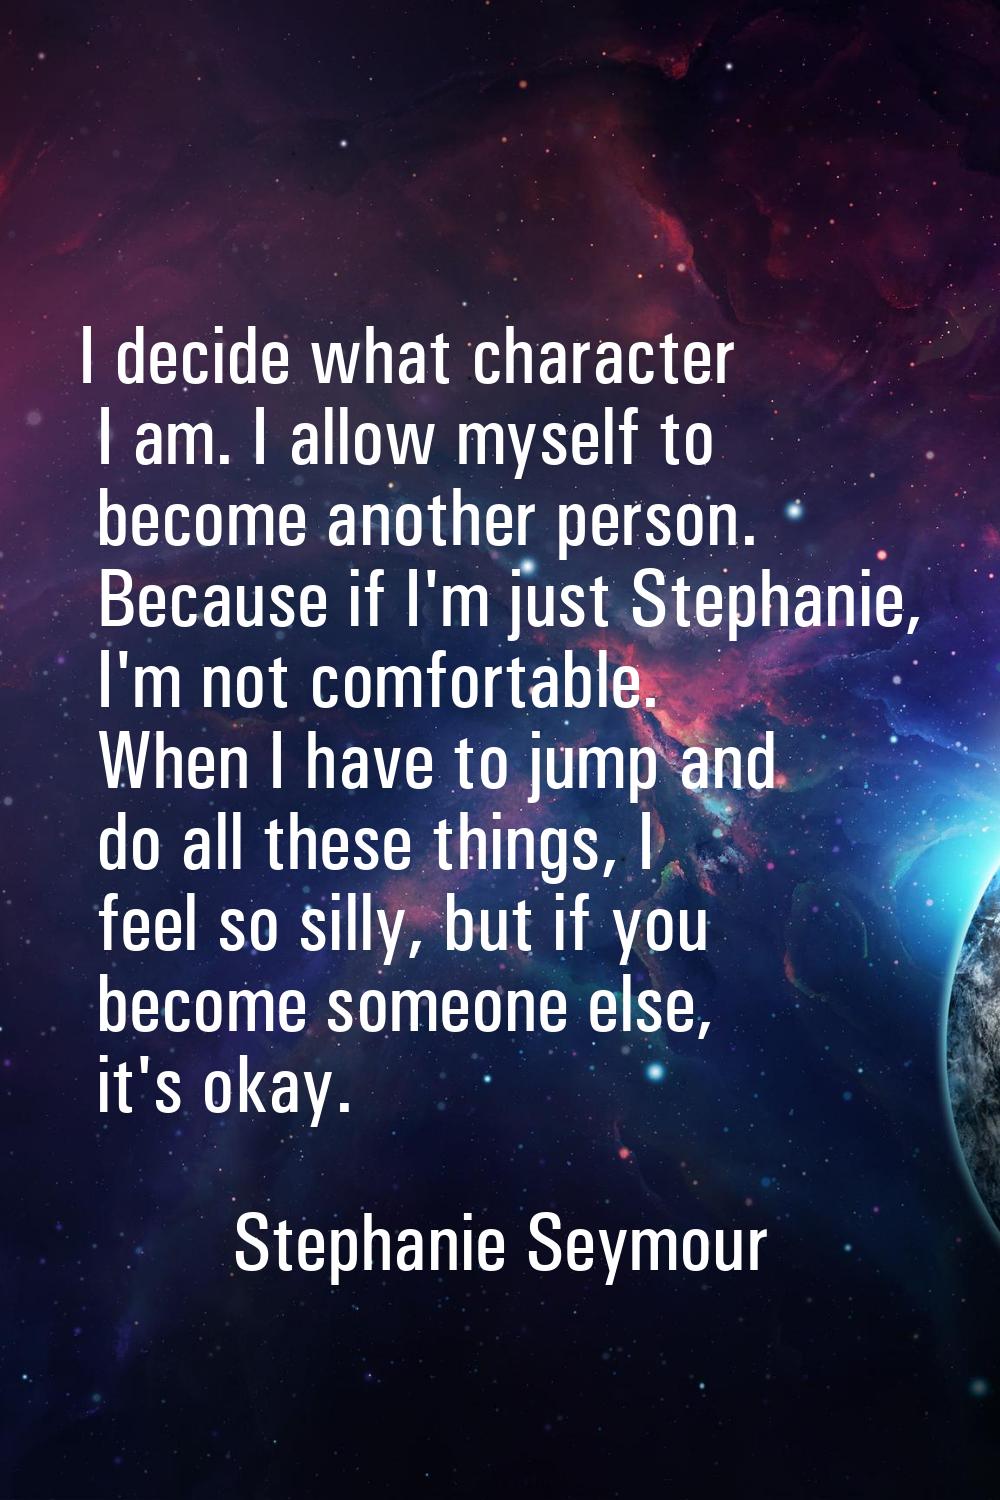 I decide what character I am. I allow myself to become another person. Because if I'm just Stephani